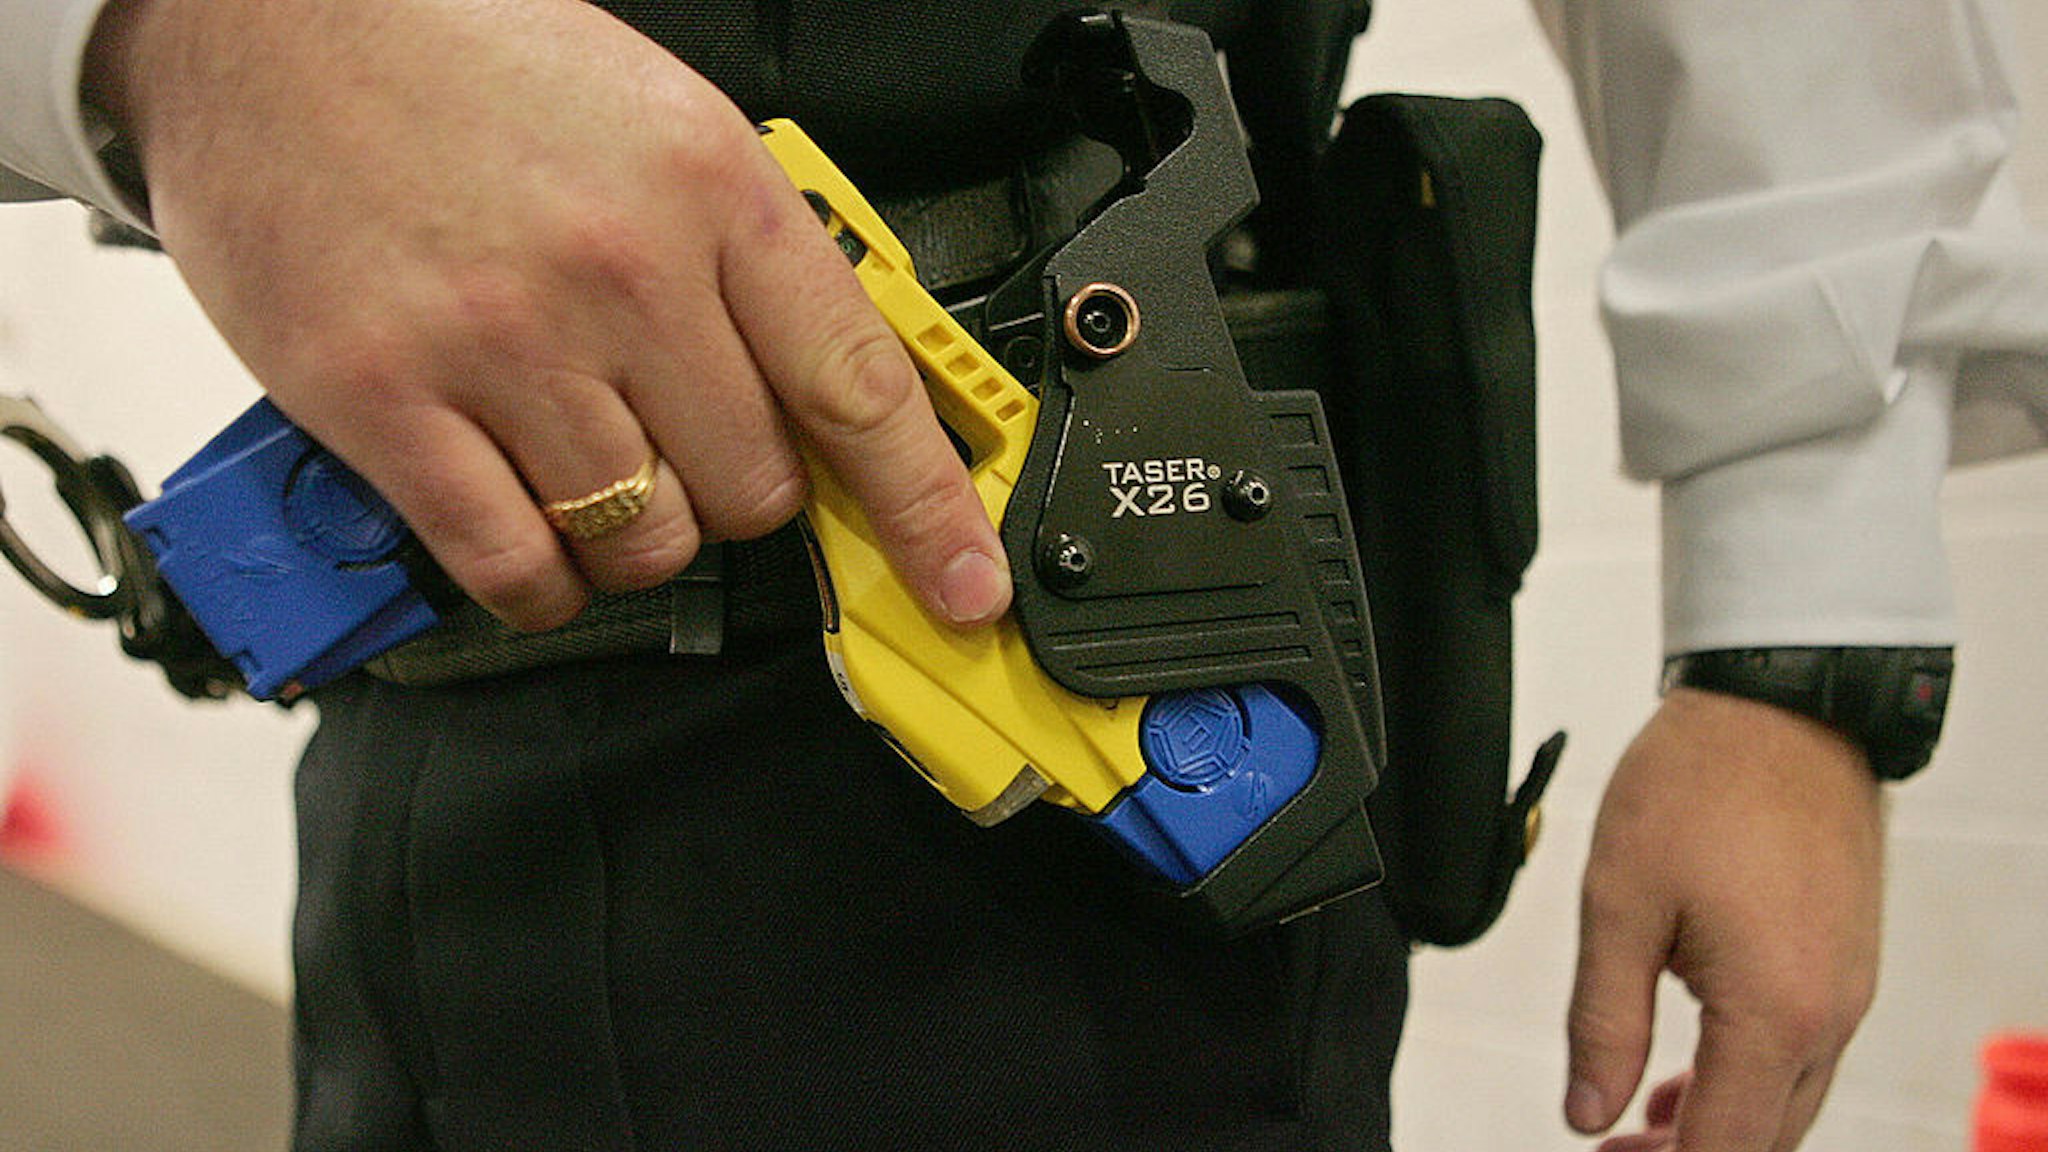 A British police officer holsters a taser gun during a training session at the Metropolitan Police Specialist Training Centre, in Gravesend, Kent, in south-east England, 05 December 2007. Taser guns are to be issued to London's Metropolitan Police from Monday 10 December 2007. AFP PHOTO/CARL DE SOUZA/FILES